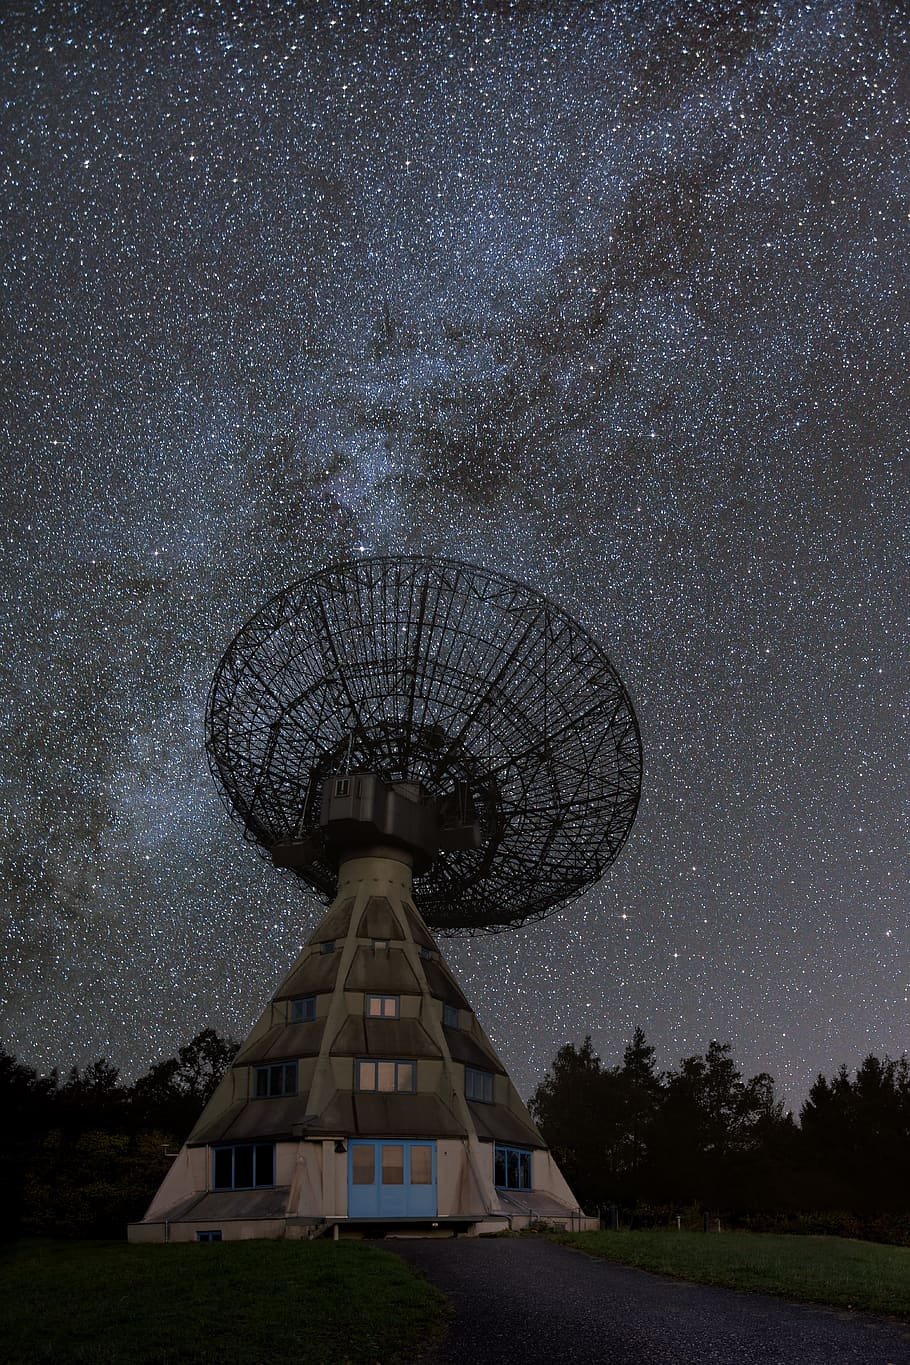 milky way, radio telescope, star, night vision, starry sky, space, astronomy, technology, star - space, communication